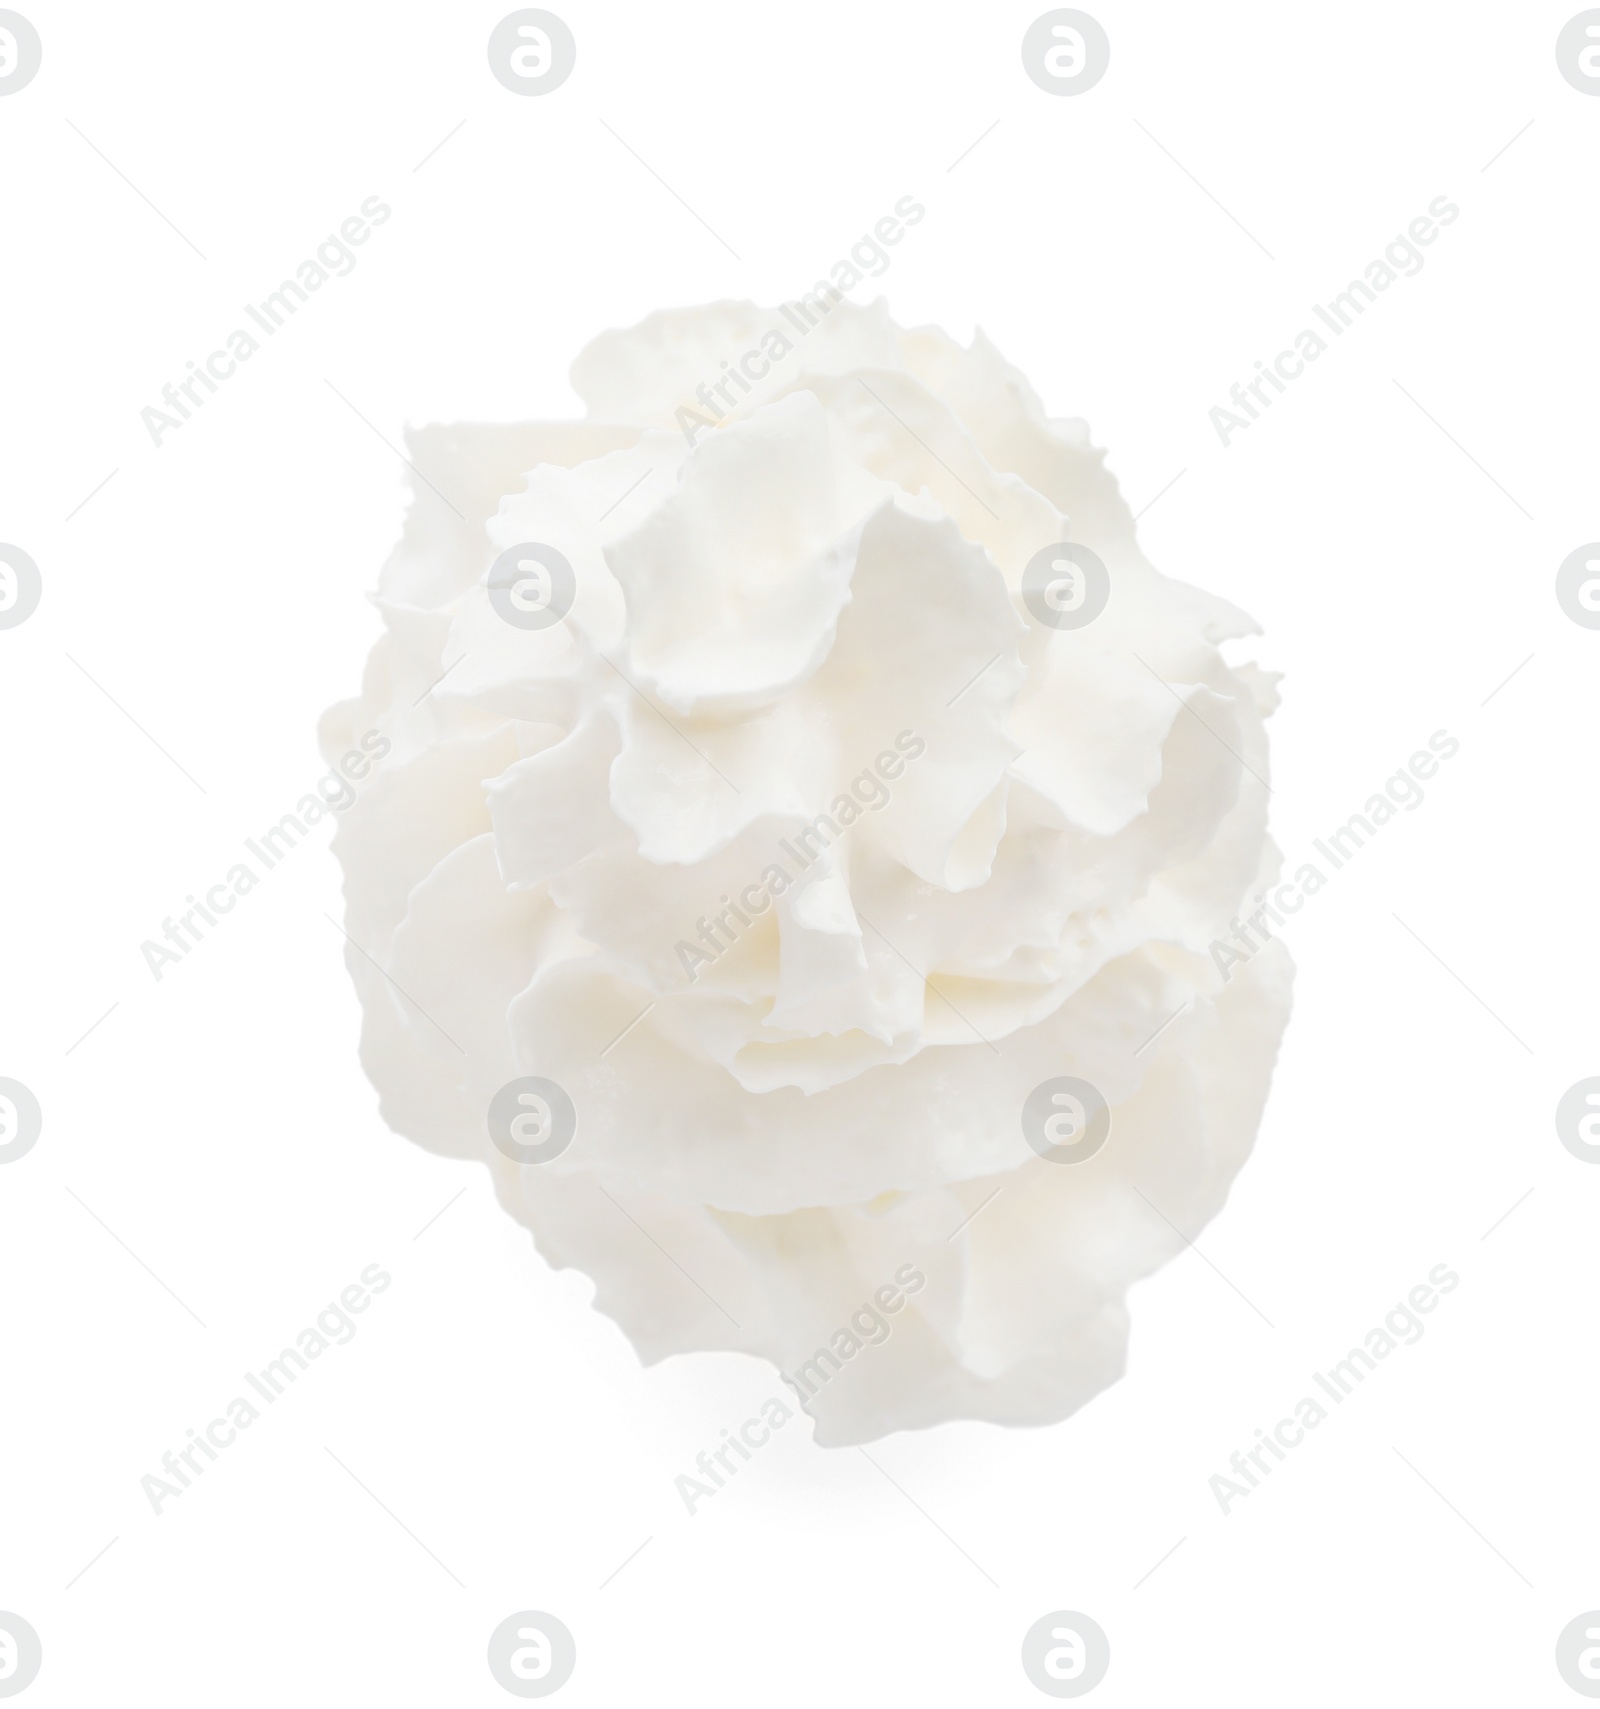 Photo of Whipped cream swirl isolated on white background, top view